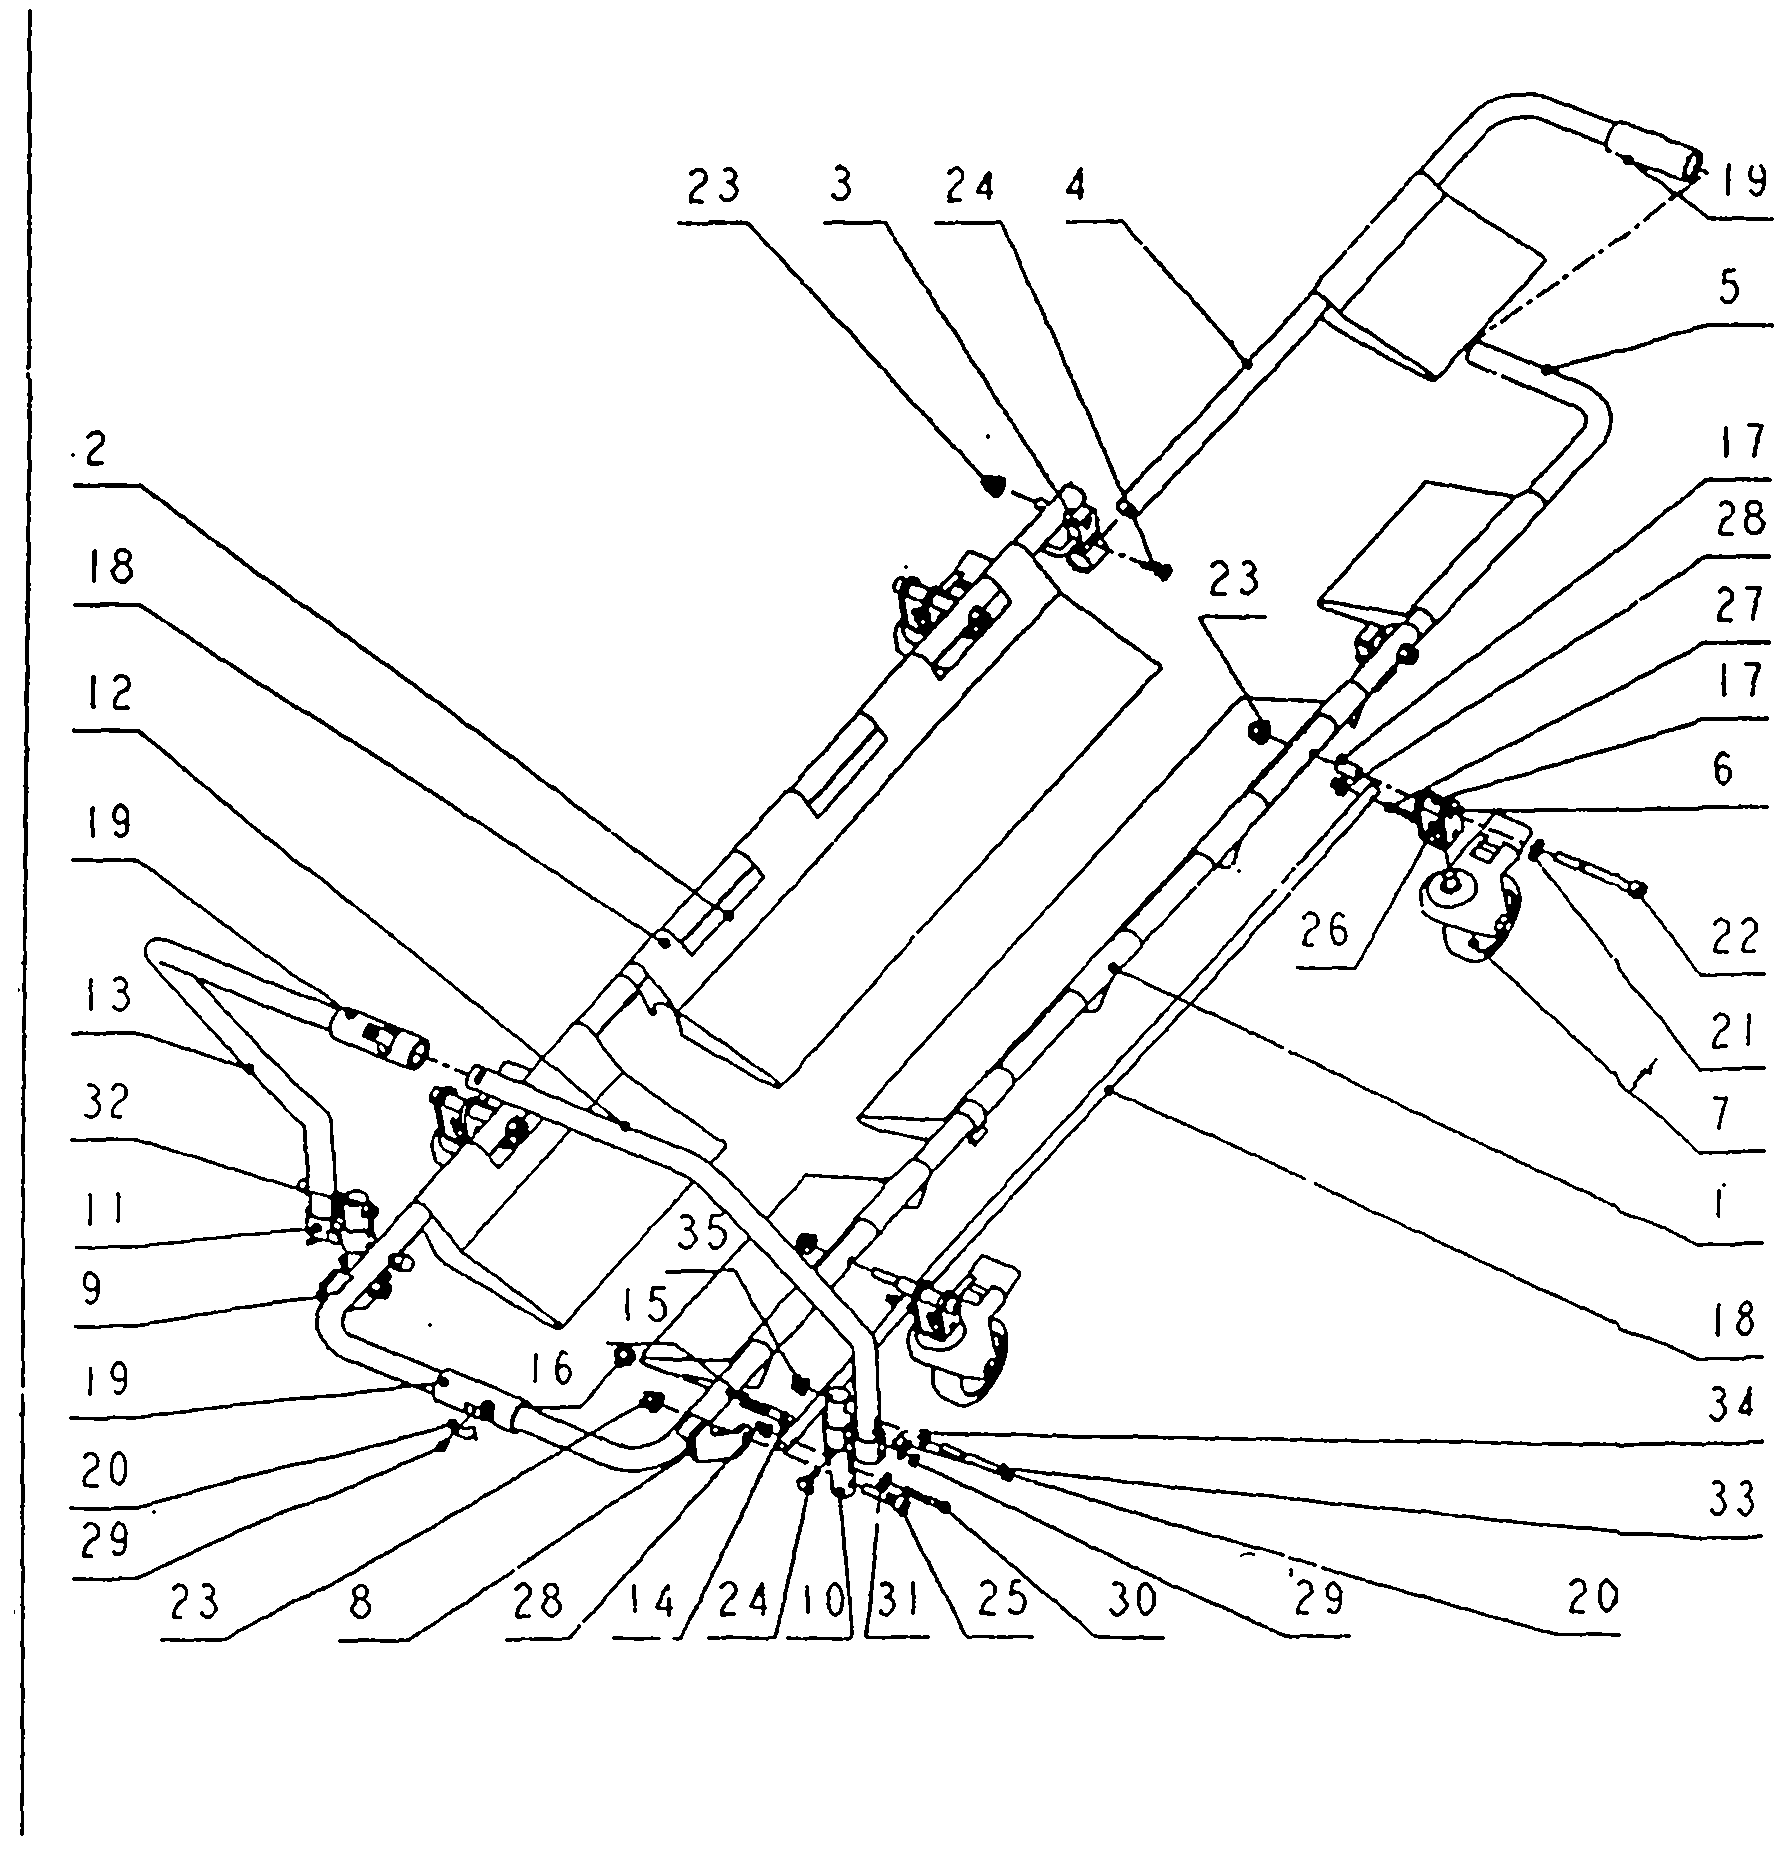 Individual first-aid stretcher structure and device